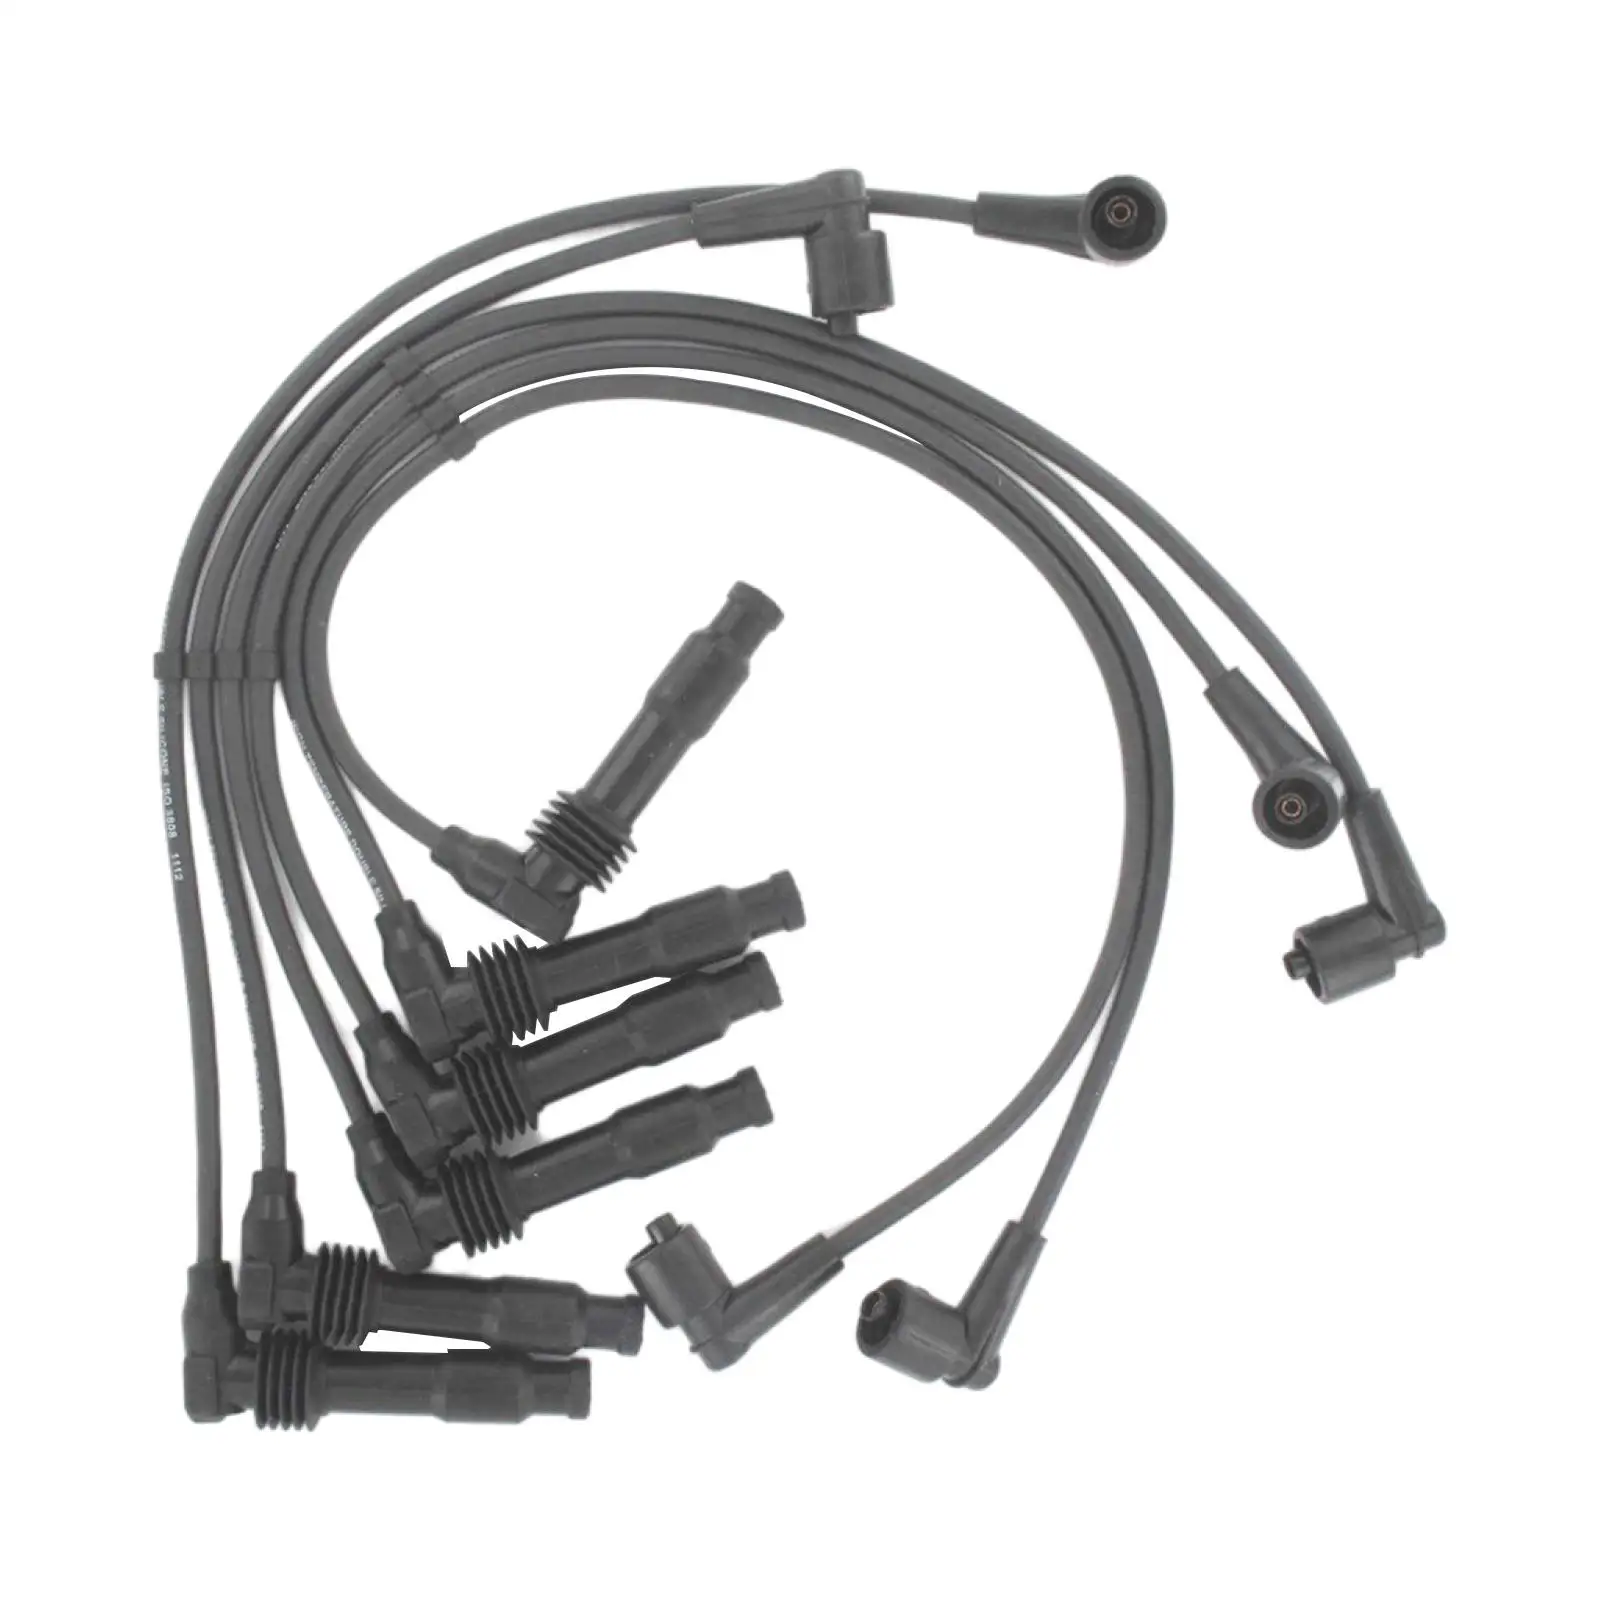 Ignition Spark Plug Cable Wire Set 90 507 989 90 510 379 90 507 990 for Maxgear